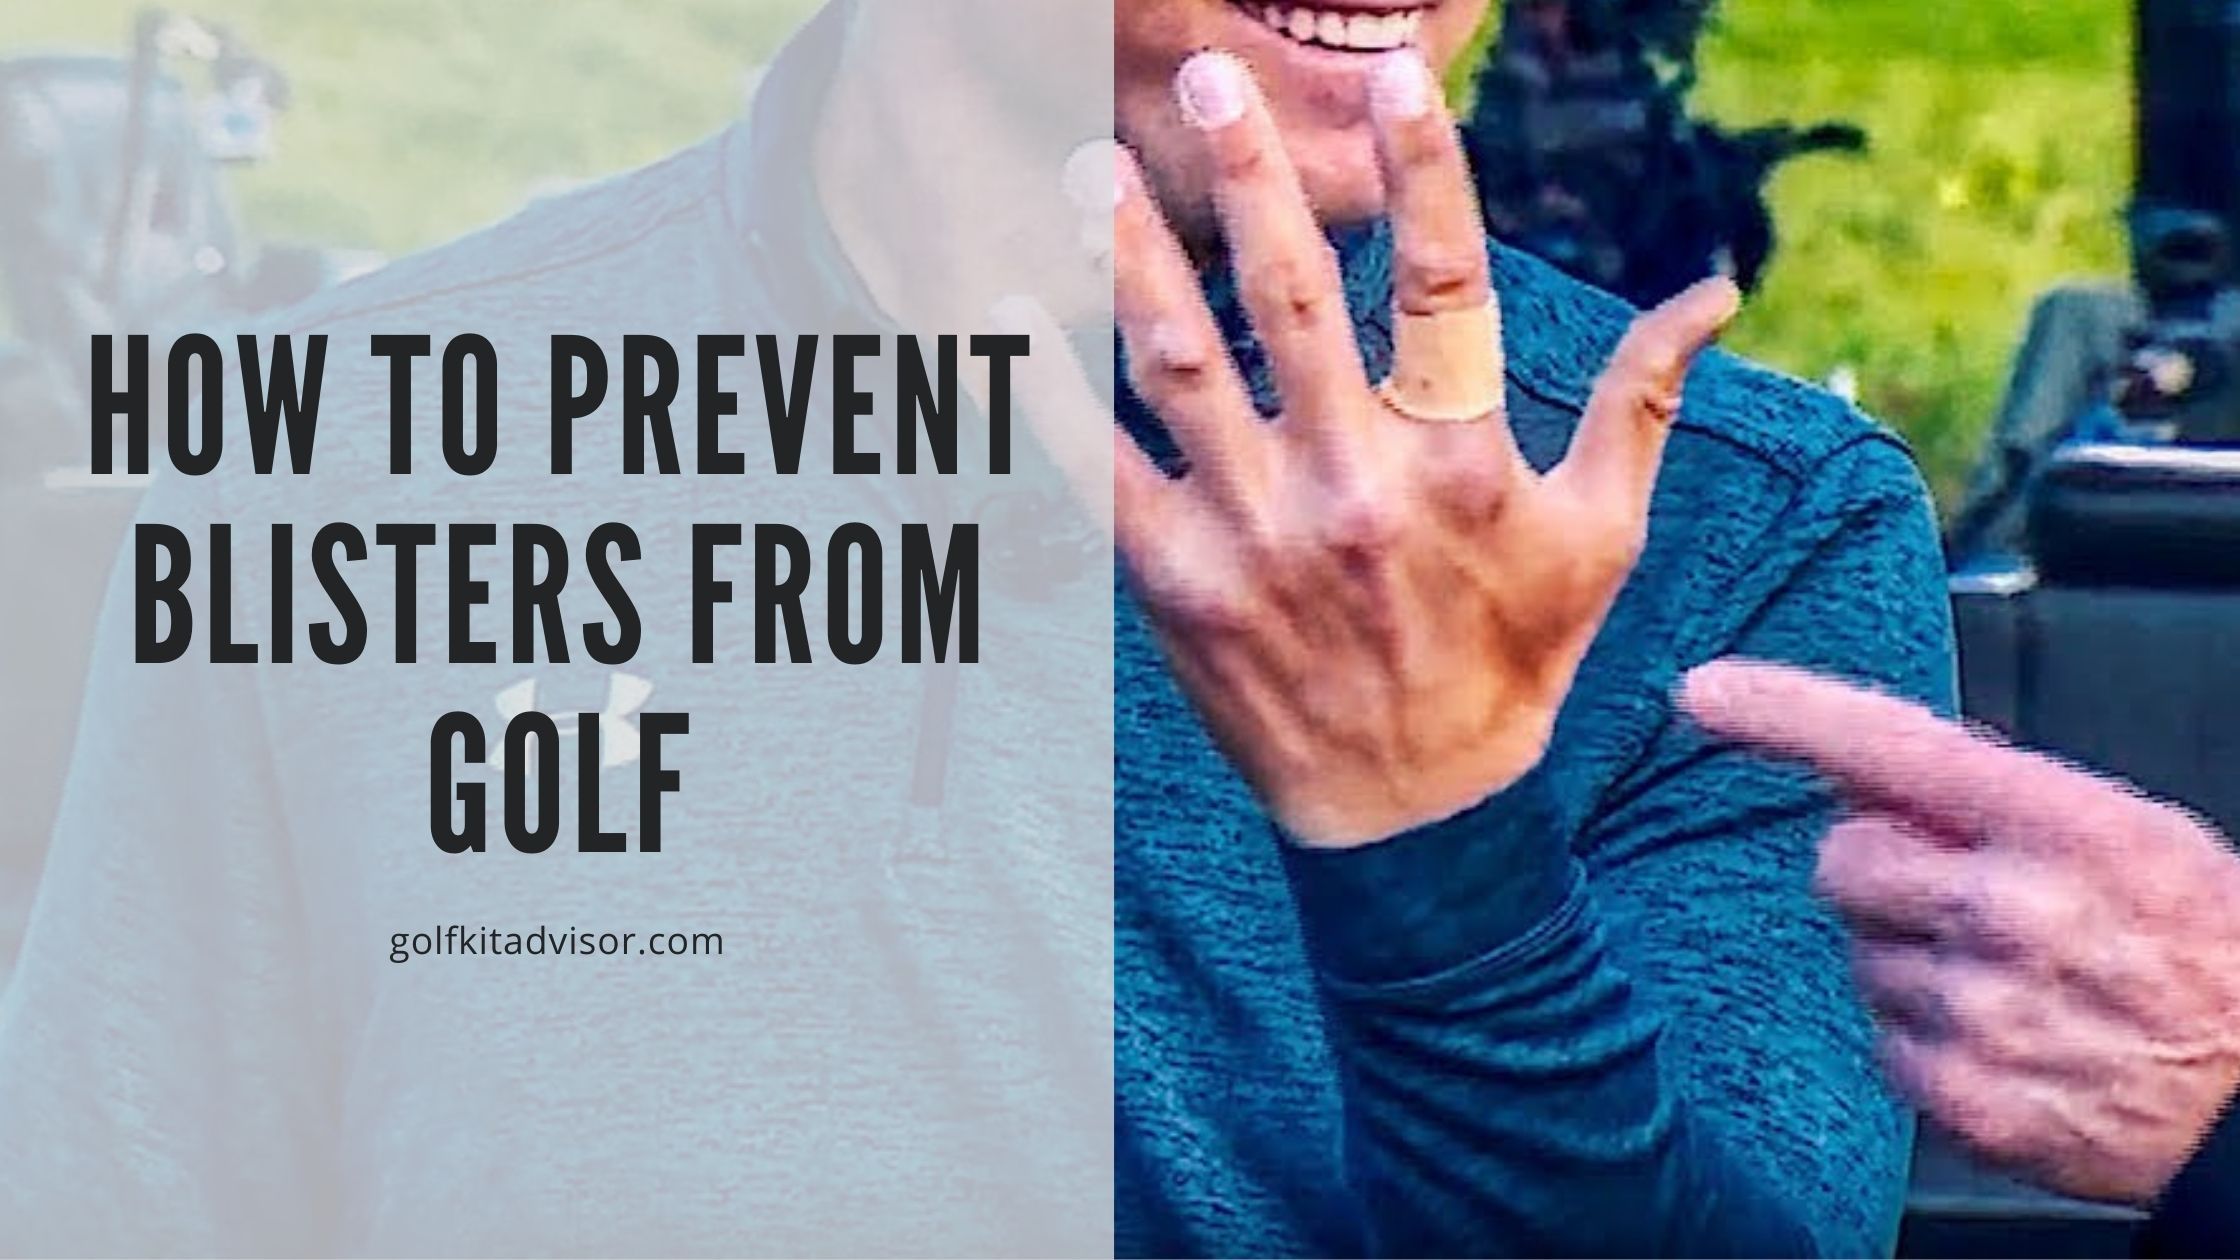 How To Prevent Blisters From Golf